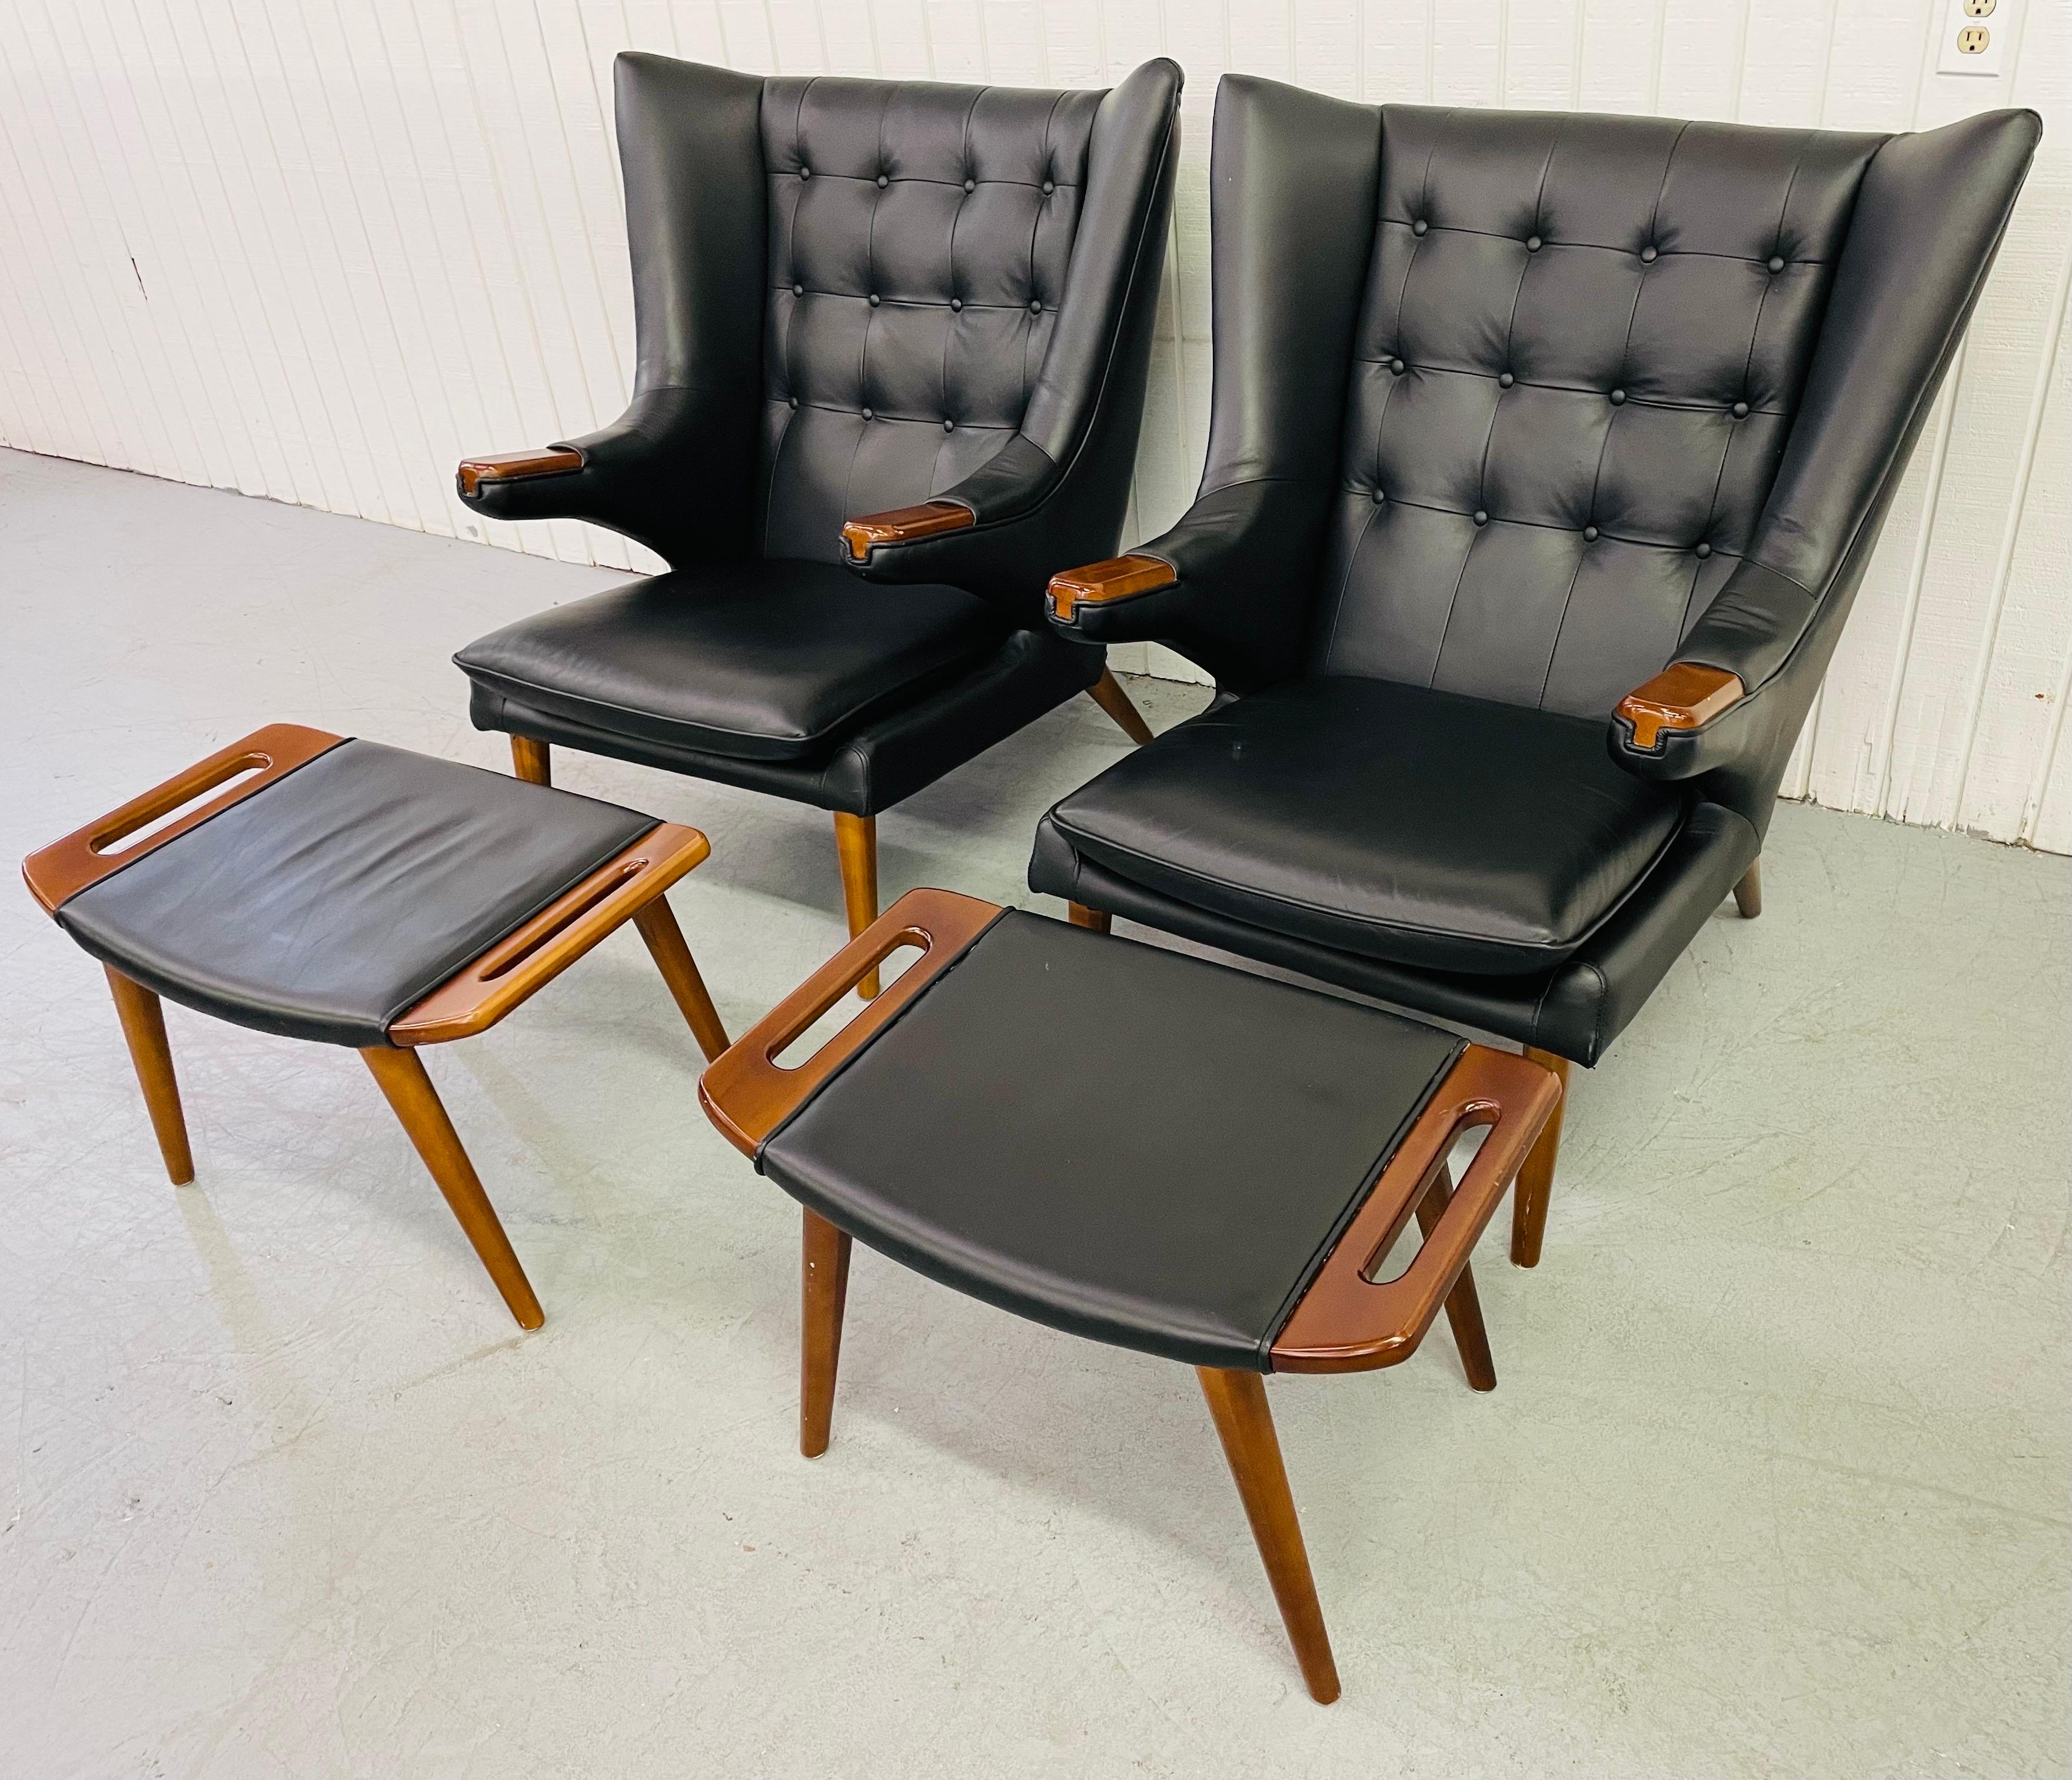 This listing is for a set of two Modern papa bear wing chairs. Two matching ottomans included. Featuring black leather upholstery, tufted backs, wood arms and legs. These are an extraordinary reproduction of Hans Wegner’s Papa Bear Chair.

Ottoman